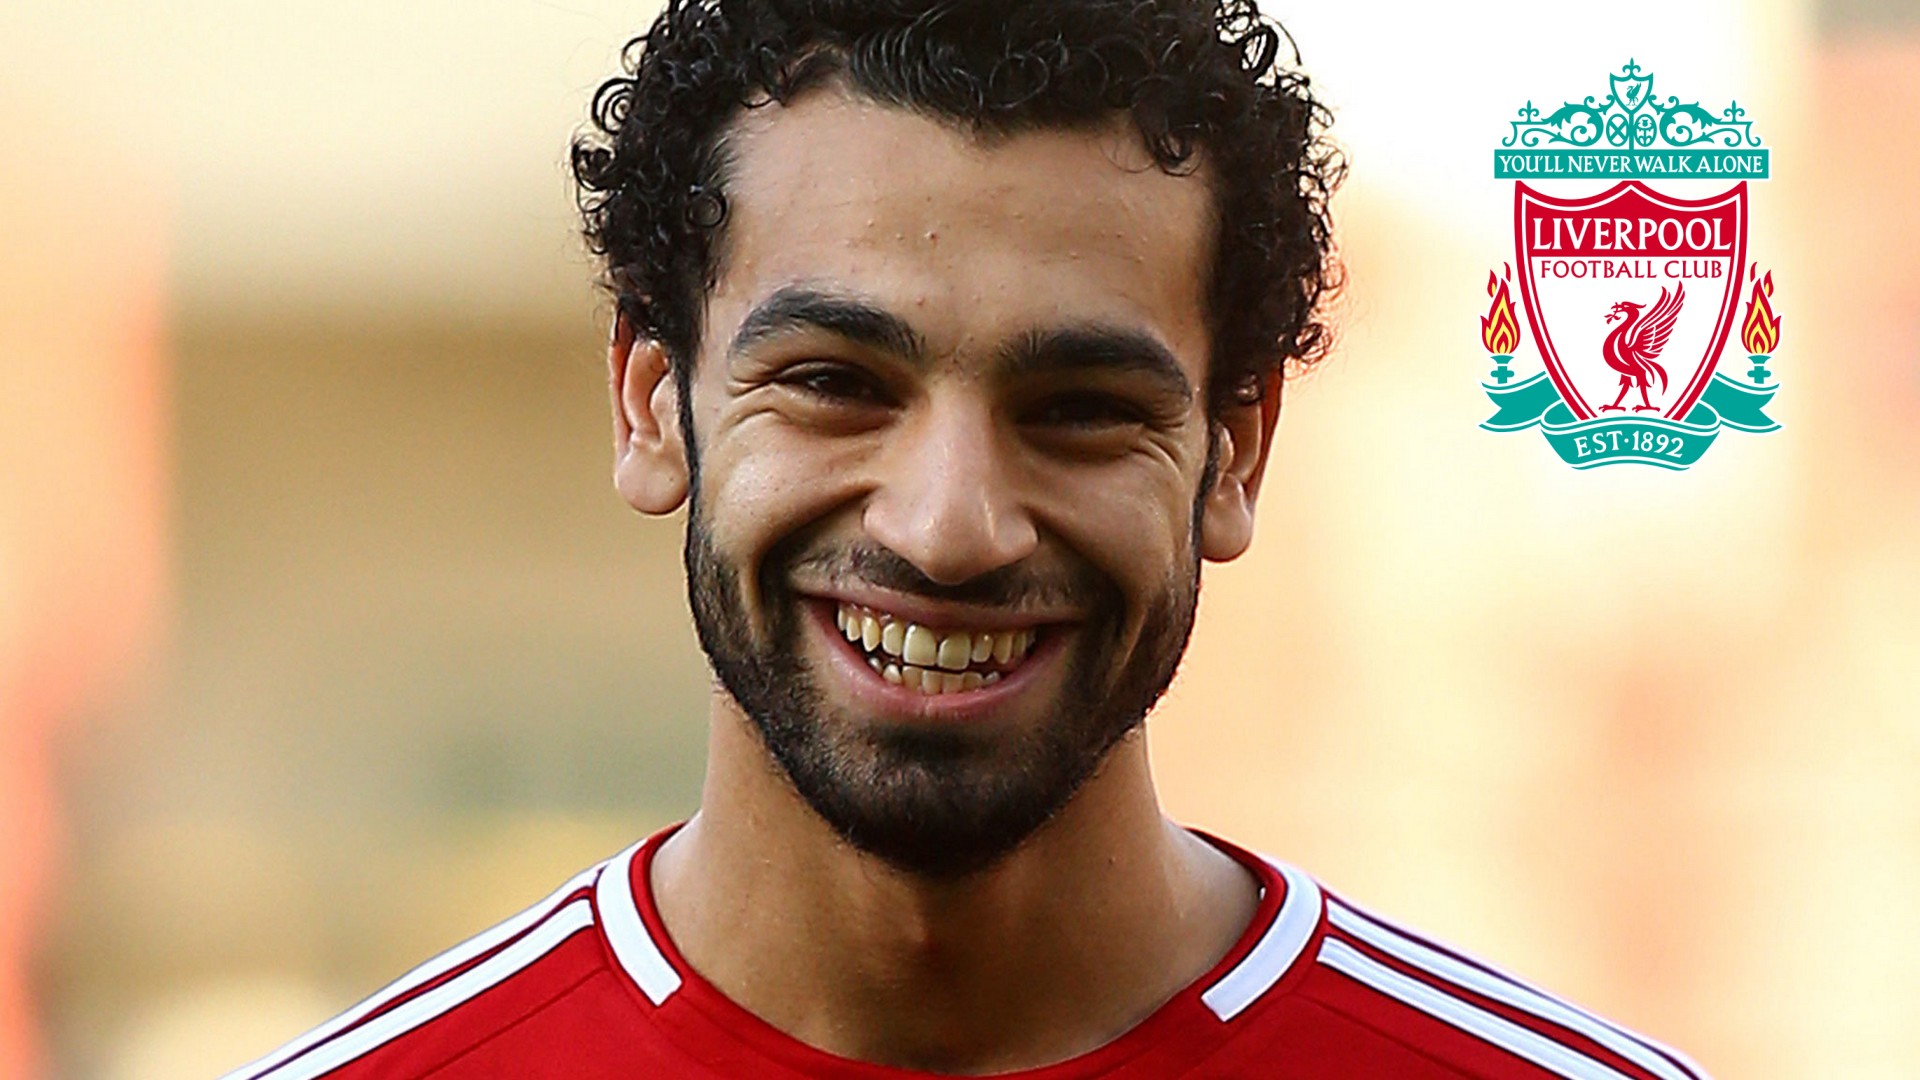 Mohamed Salah HD Wallpaper with image resolution 1920x1080 pixel. You can make this wallpaper for your Desktop Computer Backgrounds, Mac Wallpapers, Android Lock screen or iPhone Screensavers